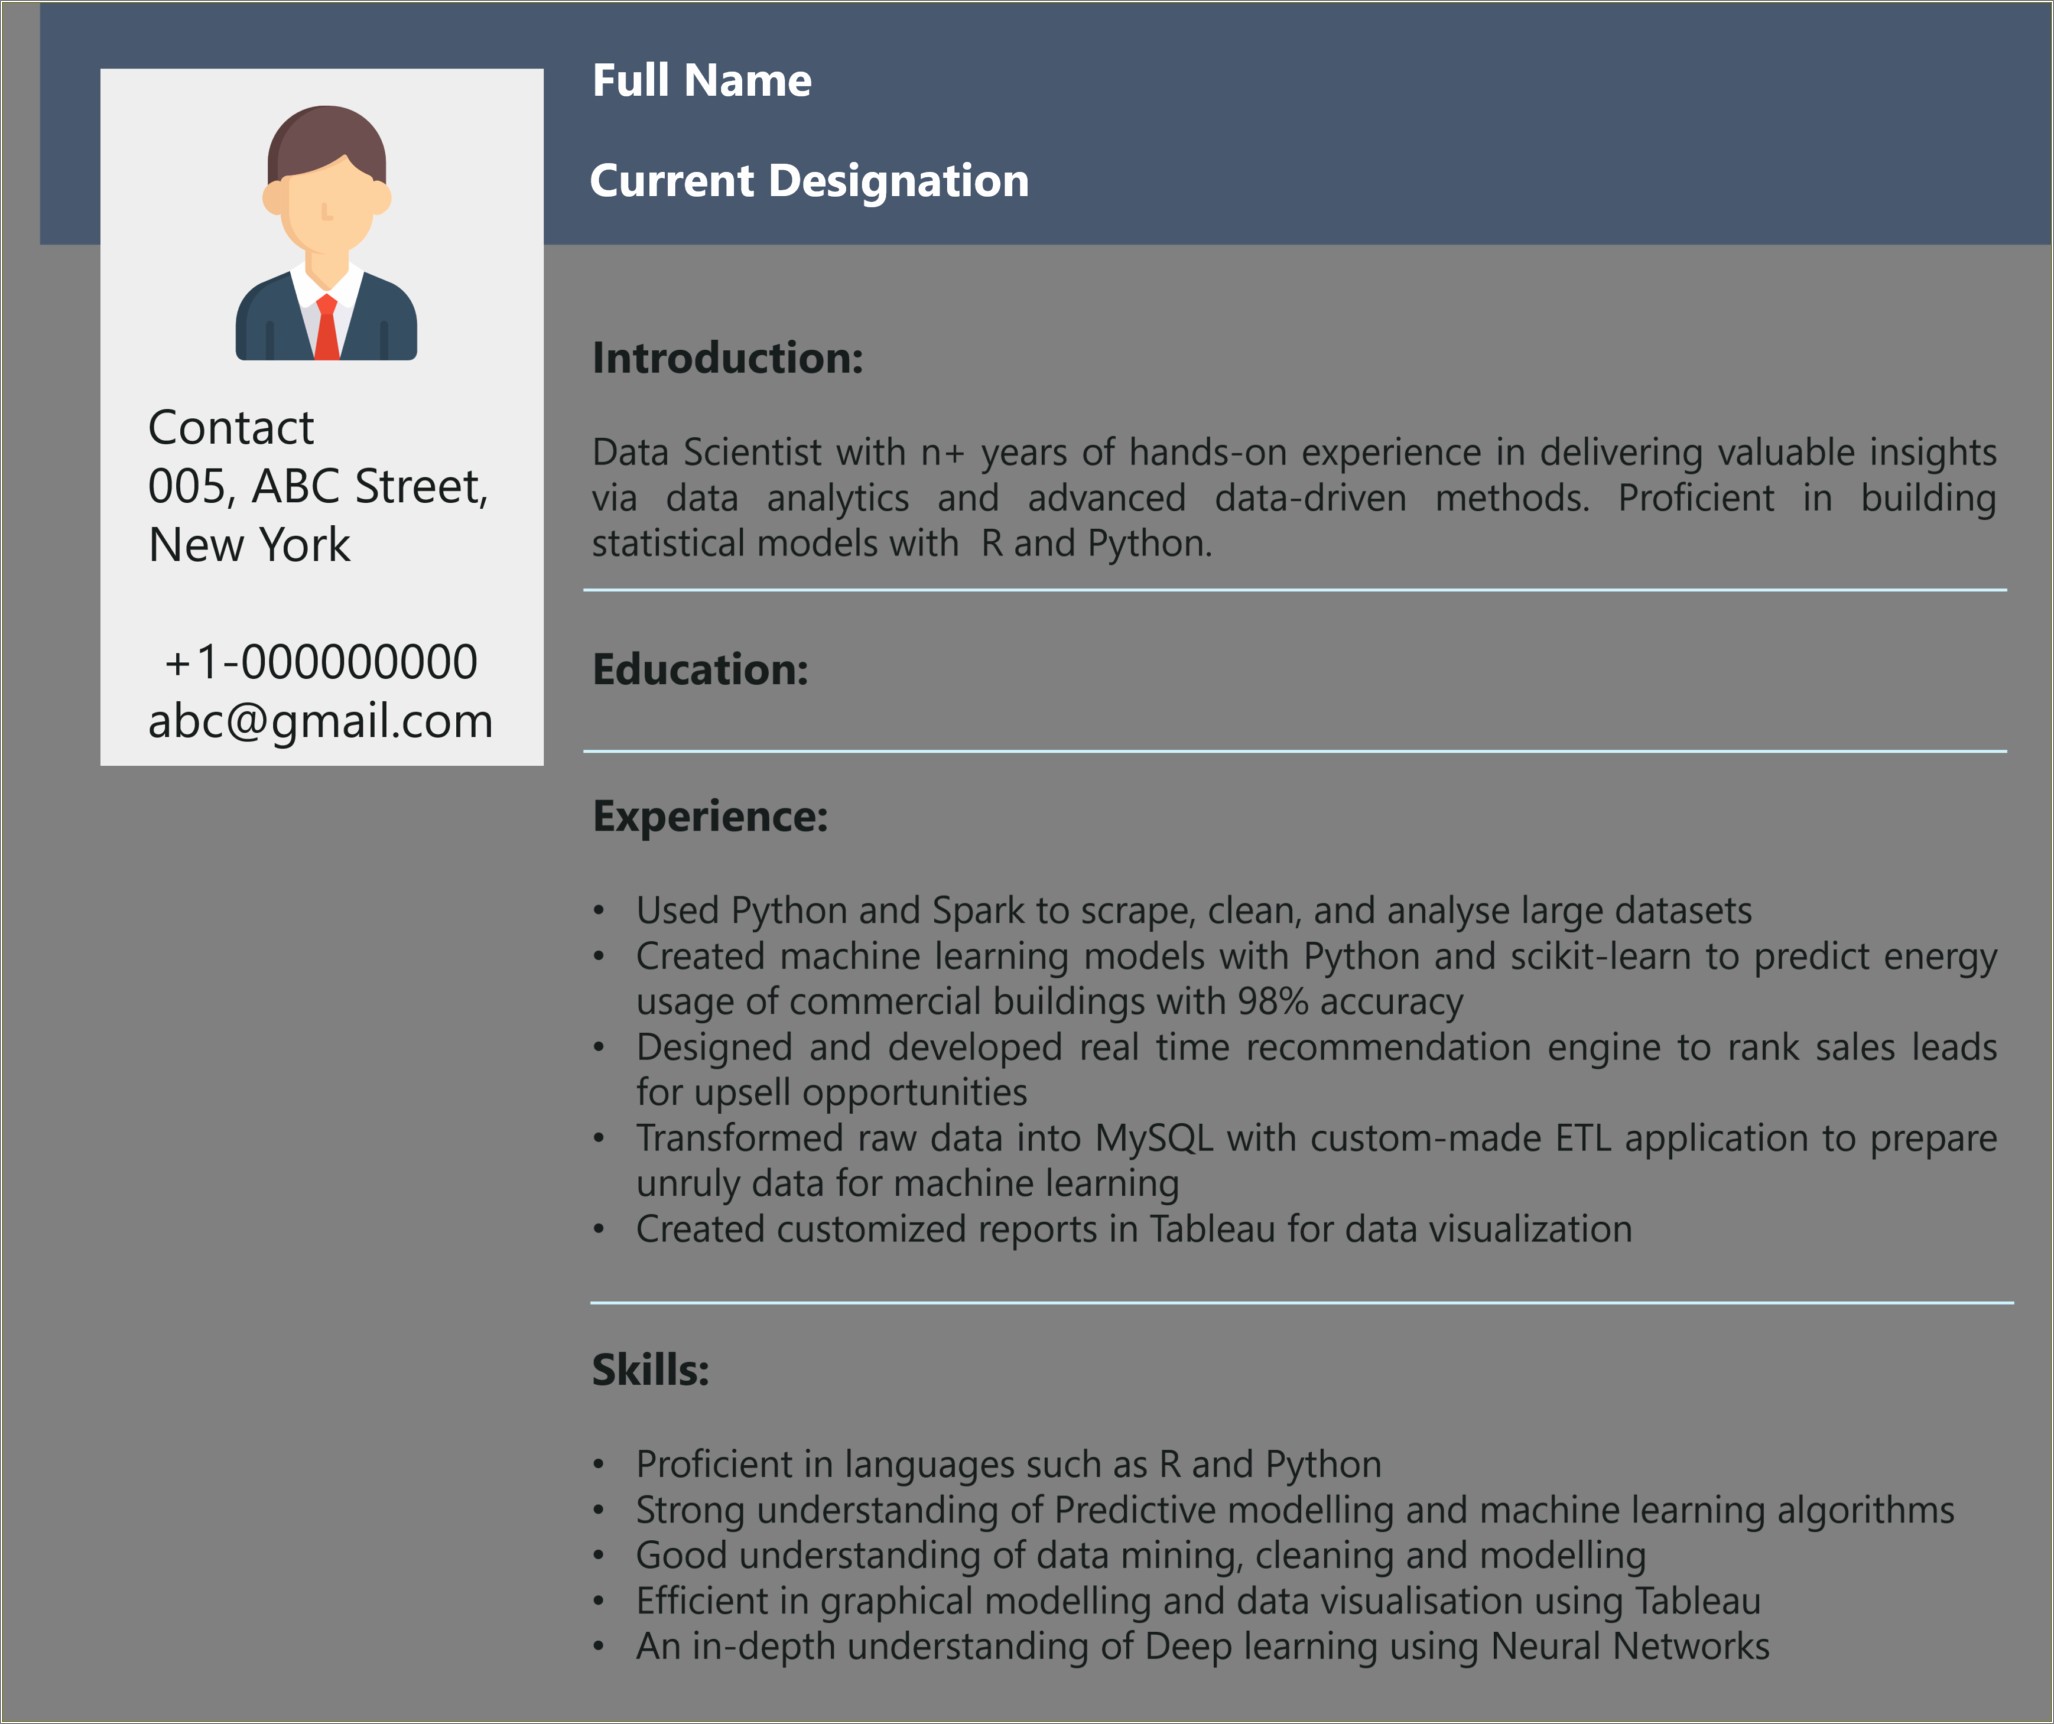 Sample Resume Of A Data Analyst